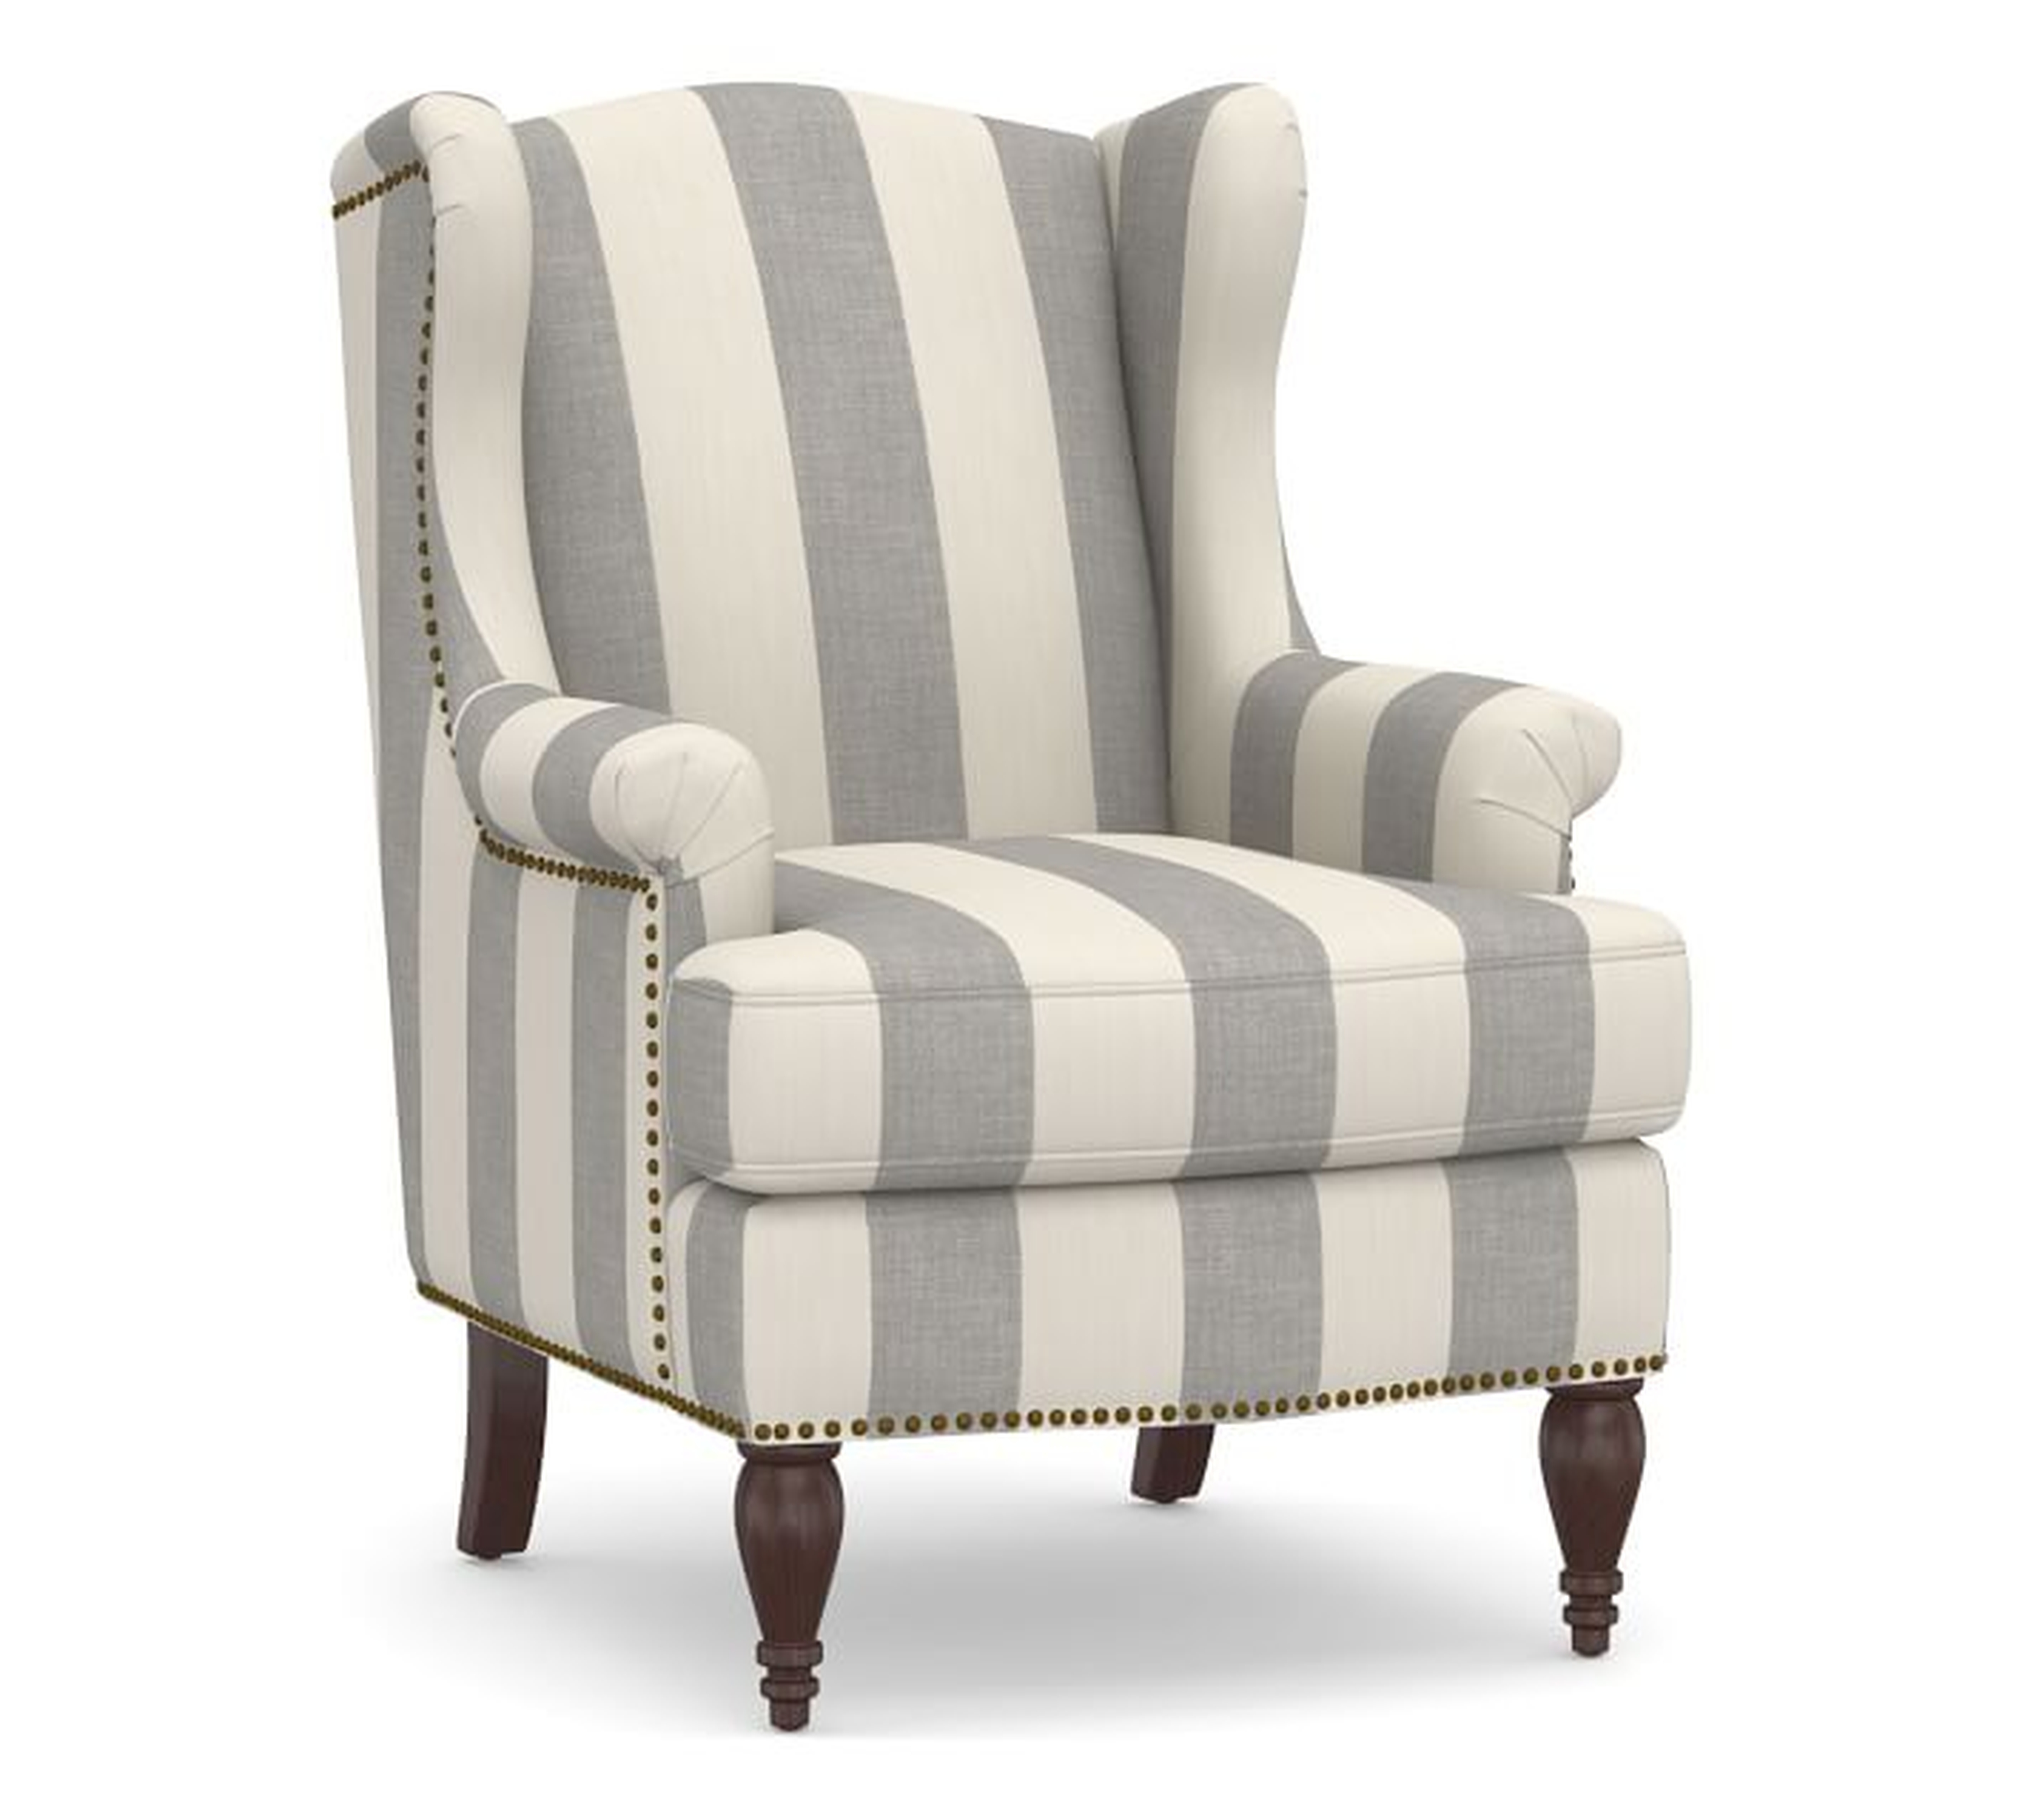 SoMa Delancey Upholstered Wingback Armchair, Polyester Wrapped Cushions, Premium Performance Awning Stripe Light Gray/Ivory - Pottery Barn